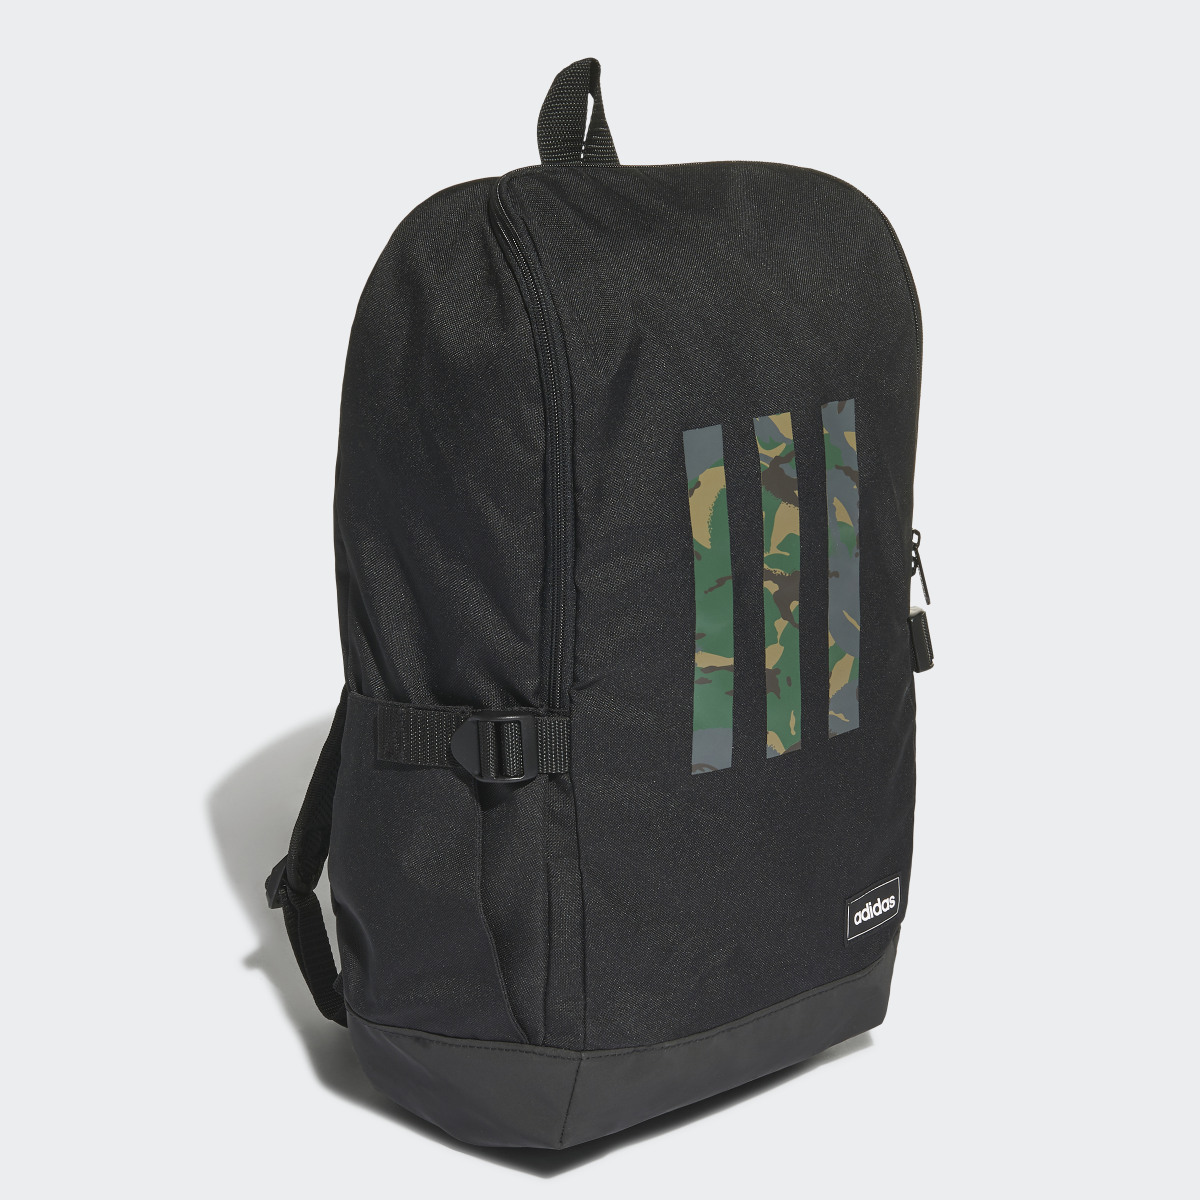 Adidas Classic Response Camouflage Backpack. 4